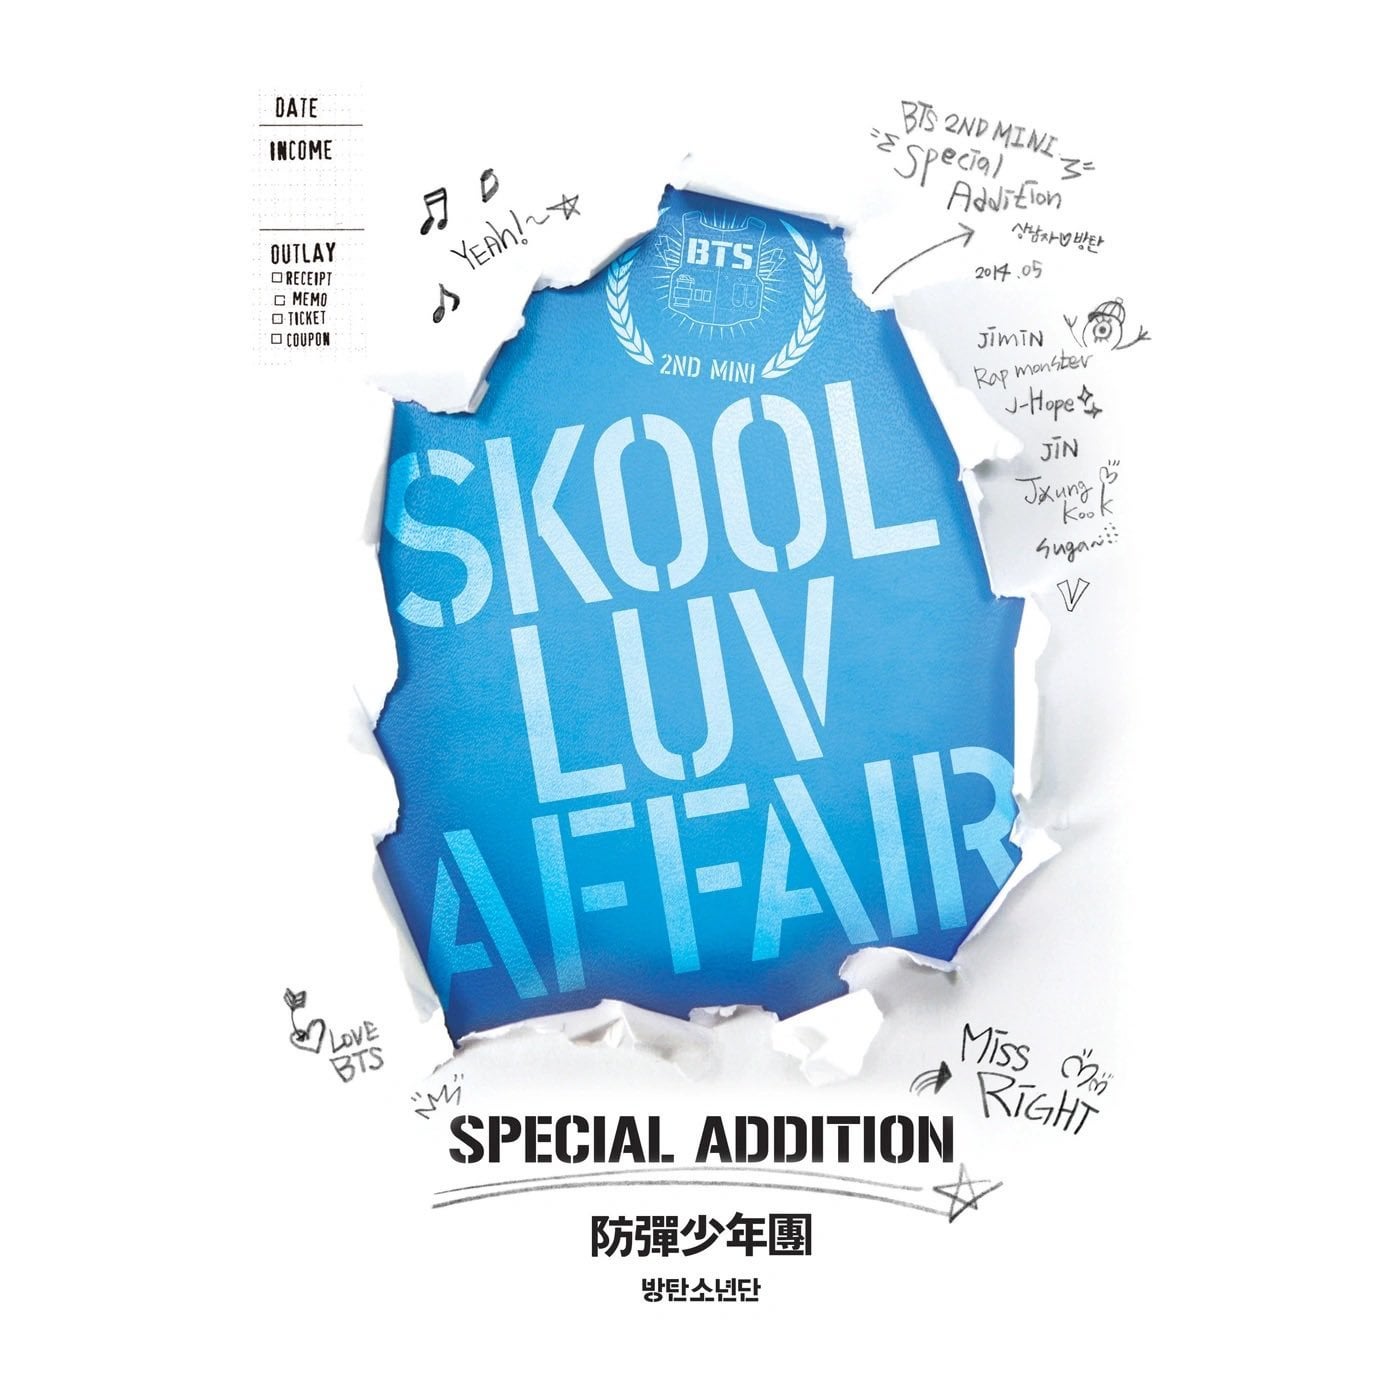 "Skool Luv Affair (Special Addition)" has surpassed 900 million streams on Spotify, BTS’ 14th album to do so. - 030324